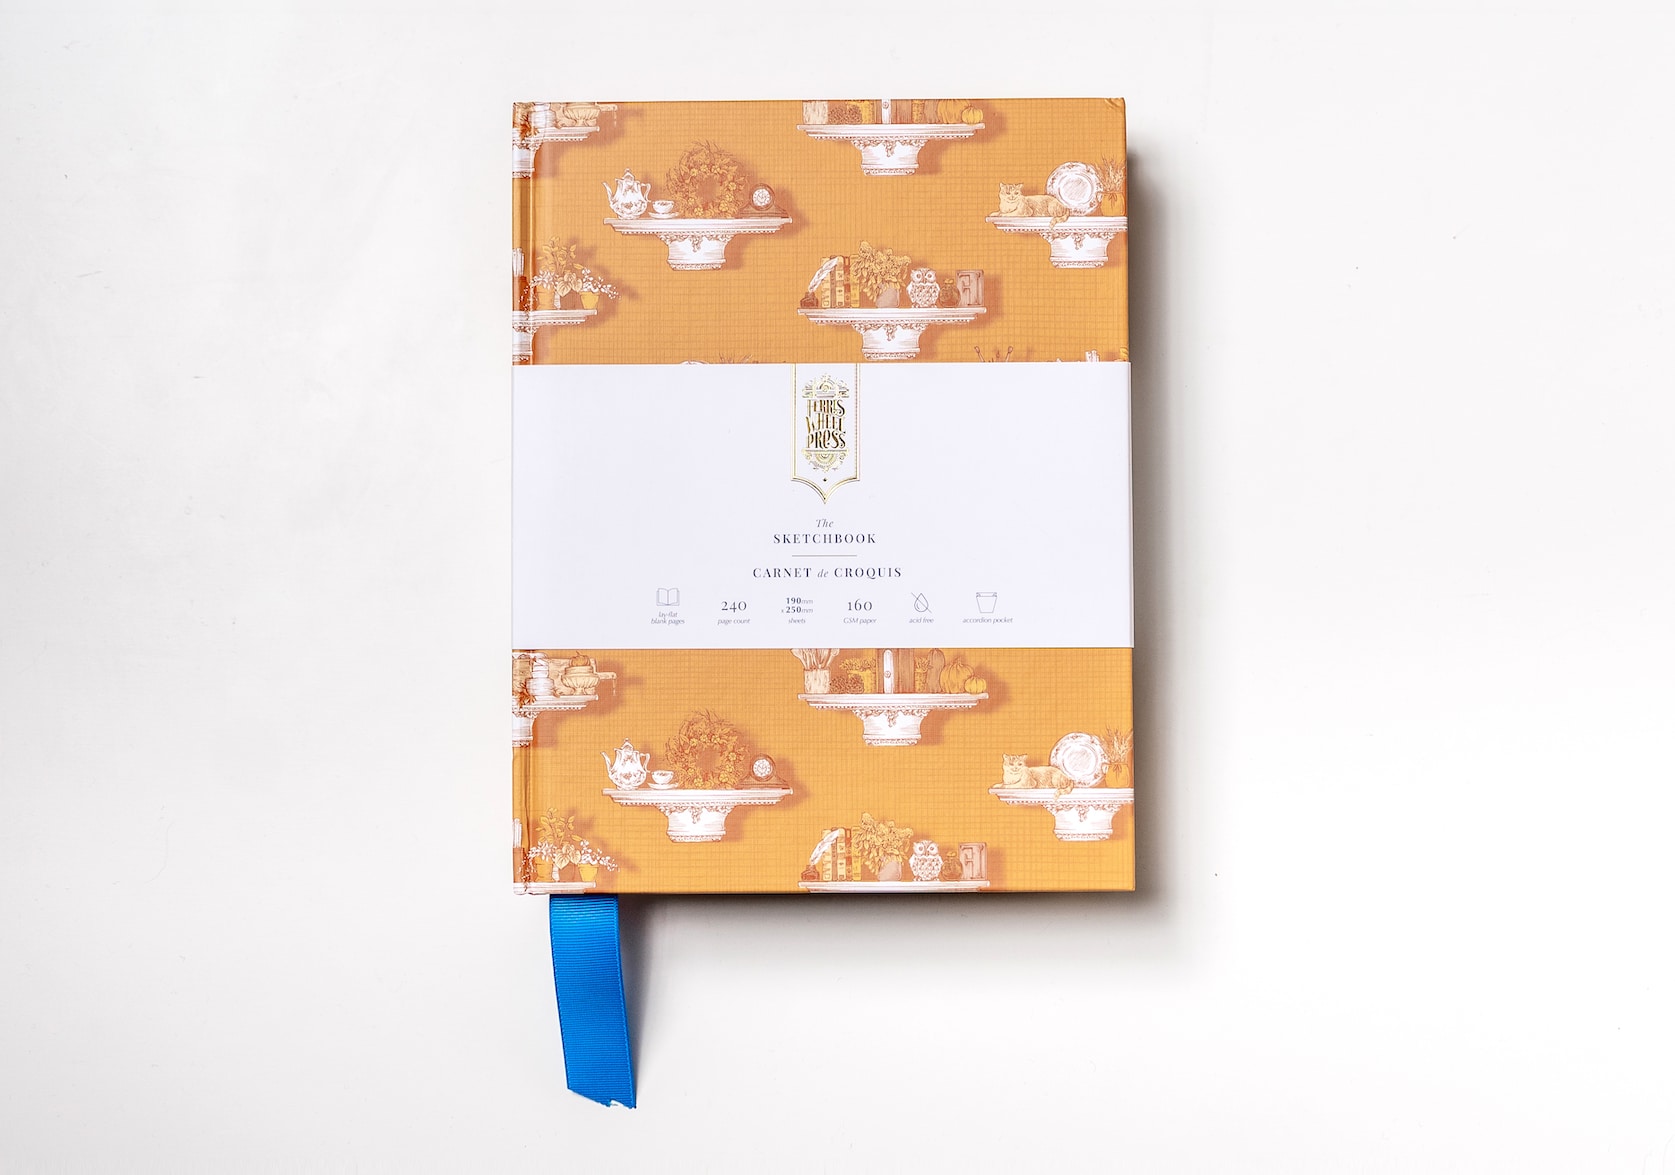 An auburn sketchbook covered in paper with a hand-illustration of white pillar shelving with various objects featuring a teal fabric ribbon sticking out of the bottom. Gold text on the notebook's packaging reads: Ferris Wheel Press logo. The Sketchbook. Carnet de Croquis.